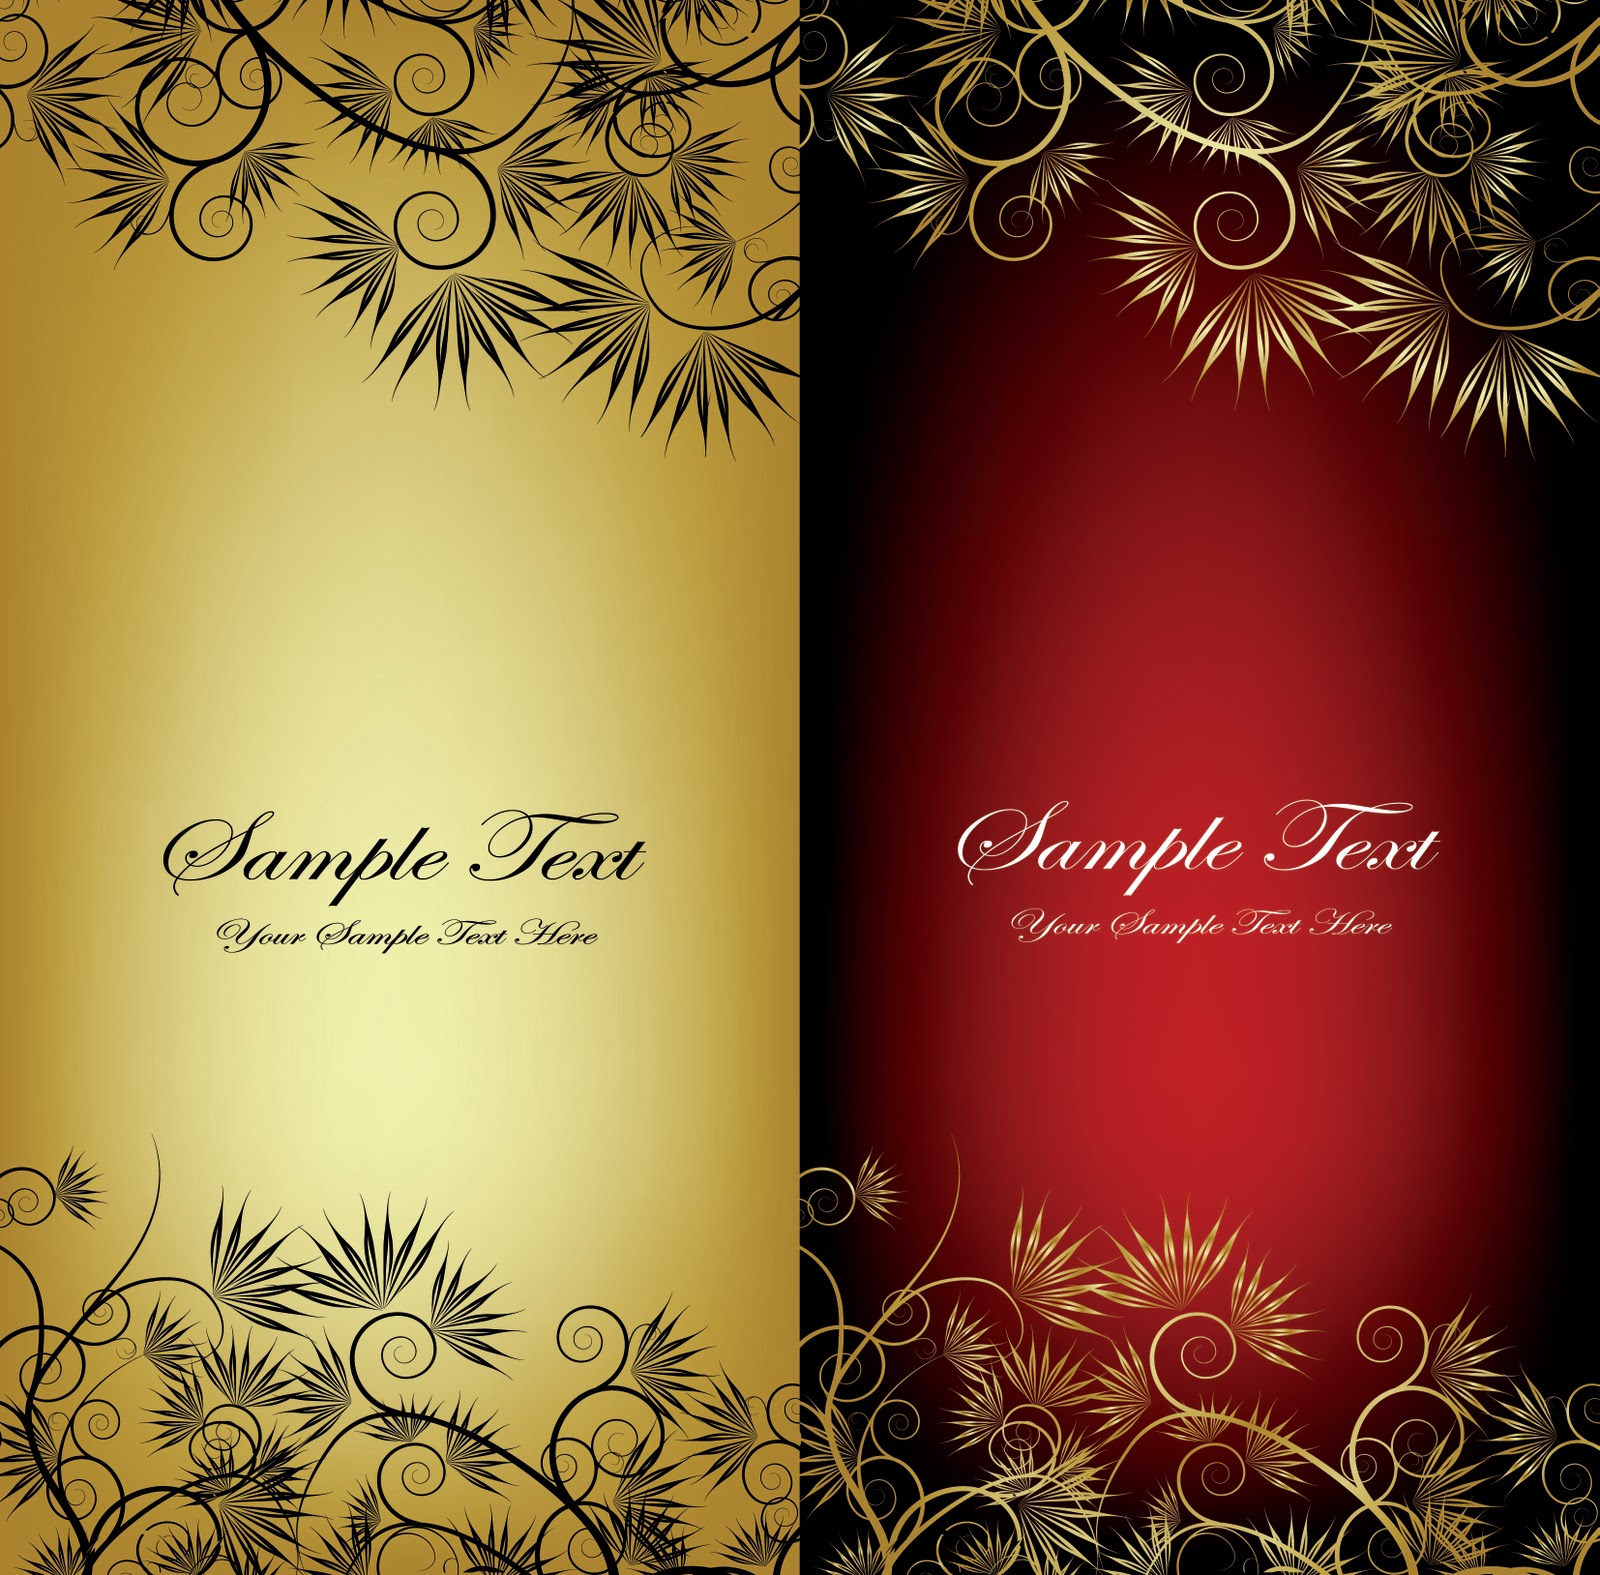 ... Vintage Banner Vectorfree download, free download vector, CDR, EPS, AI